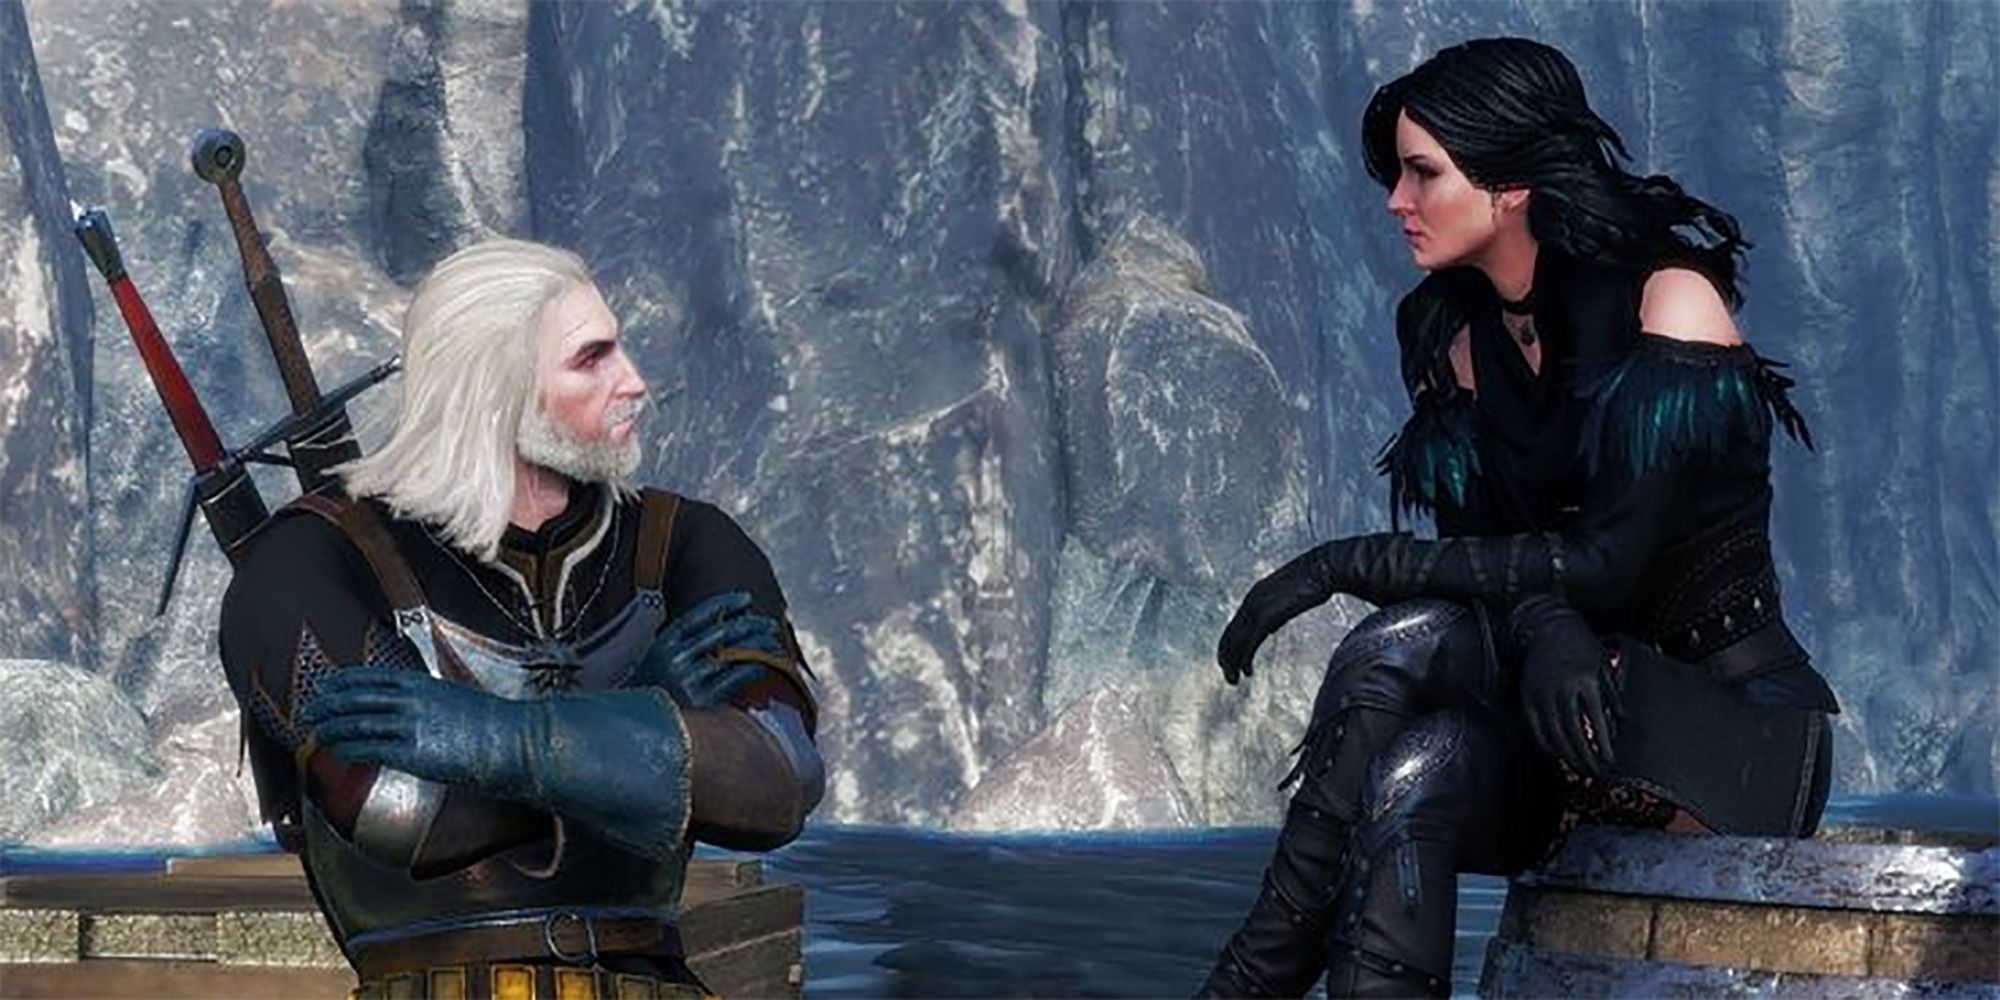 Geralt and Yennefer talking on the shipwreck after hunting for the djinn